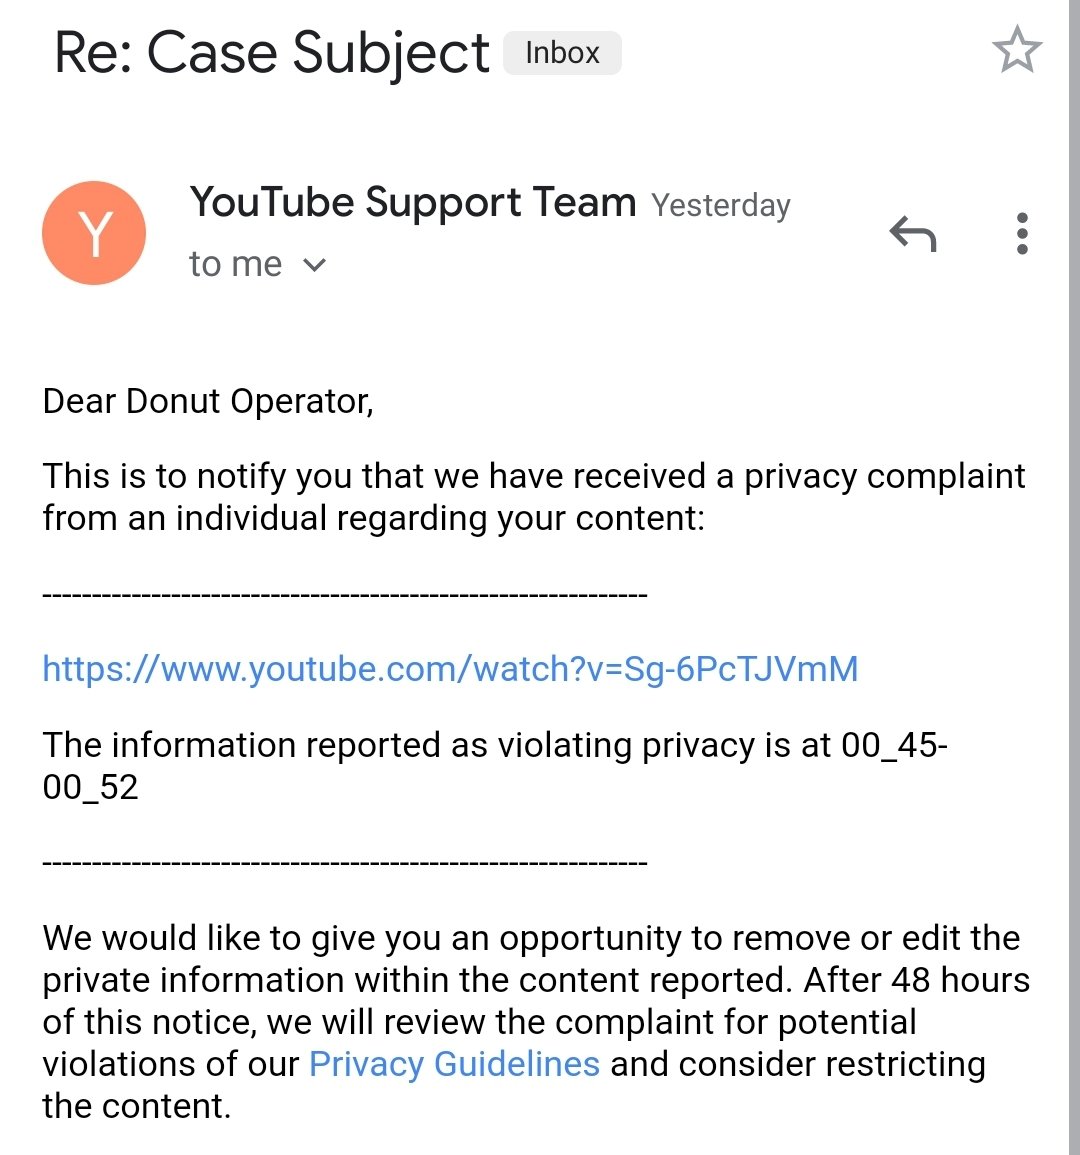 The guy that told me to kill myself and wished harm on my family filed a privacy complaint to remove the part where I read his message on this video. If you think I'm doing that, you're out of your goddamned mind.